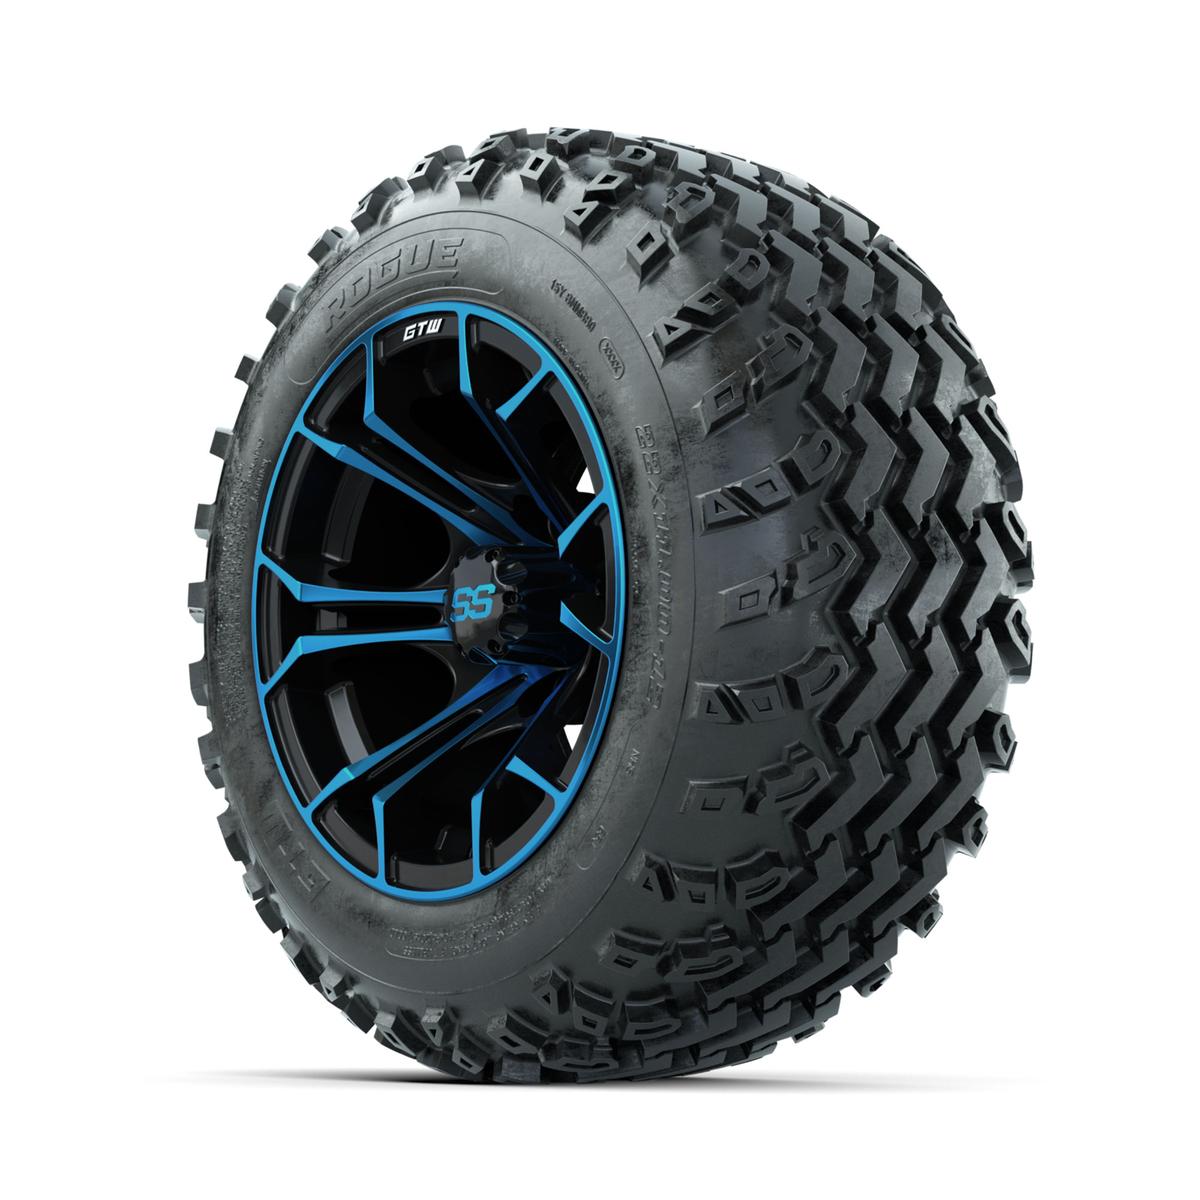 GTW Spyder Blue/Black 12 in Wheels with 22x11.00-12 Rogue All Terrain Tires – Full Set